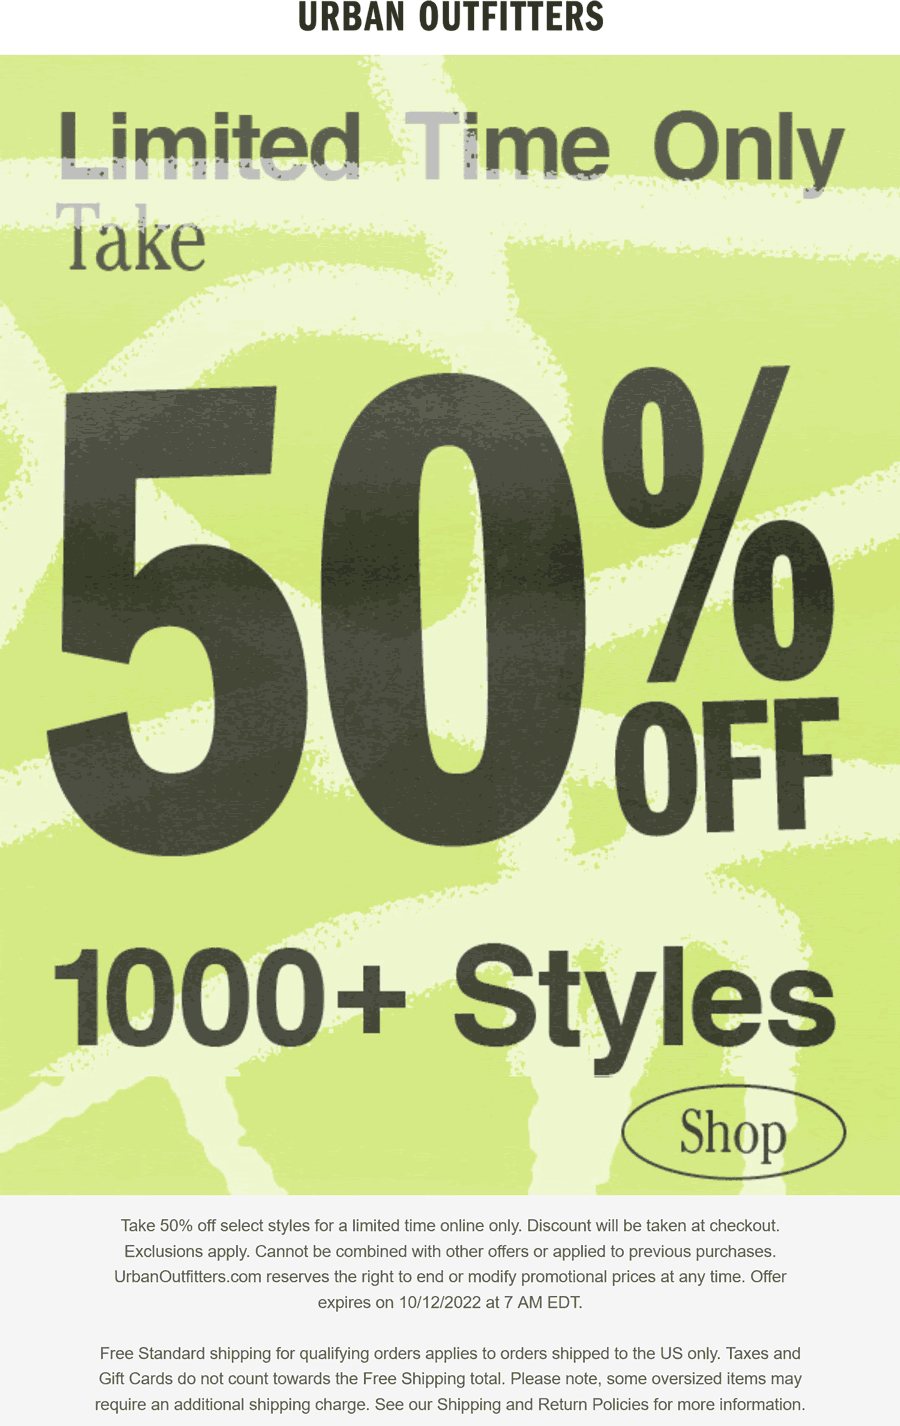 Urban Outfitters stores Coupon  50% off online at Urban Outfitters #urbanoutfitters 